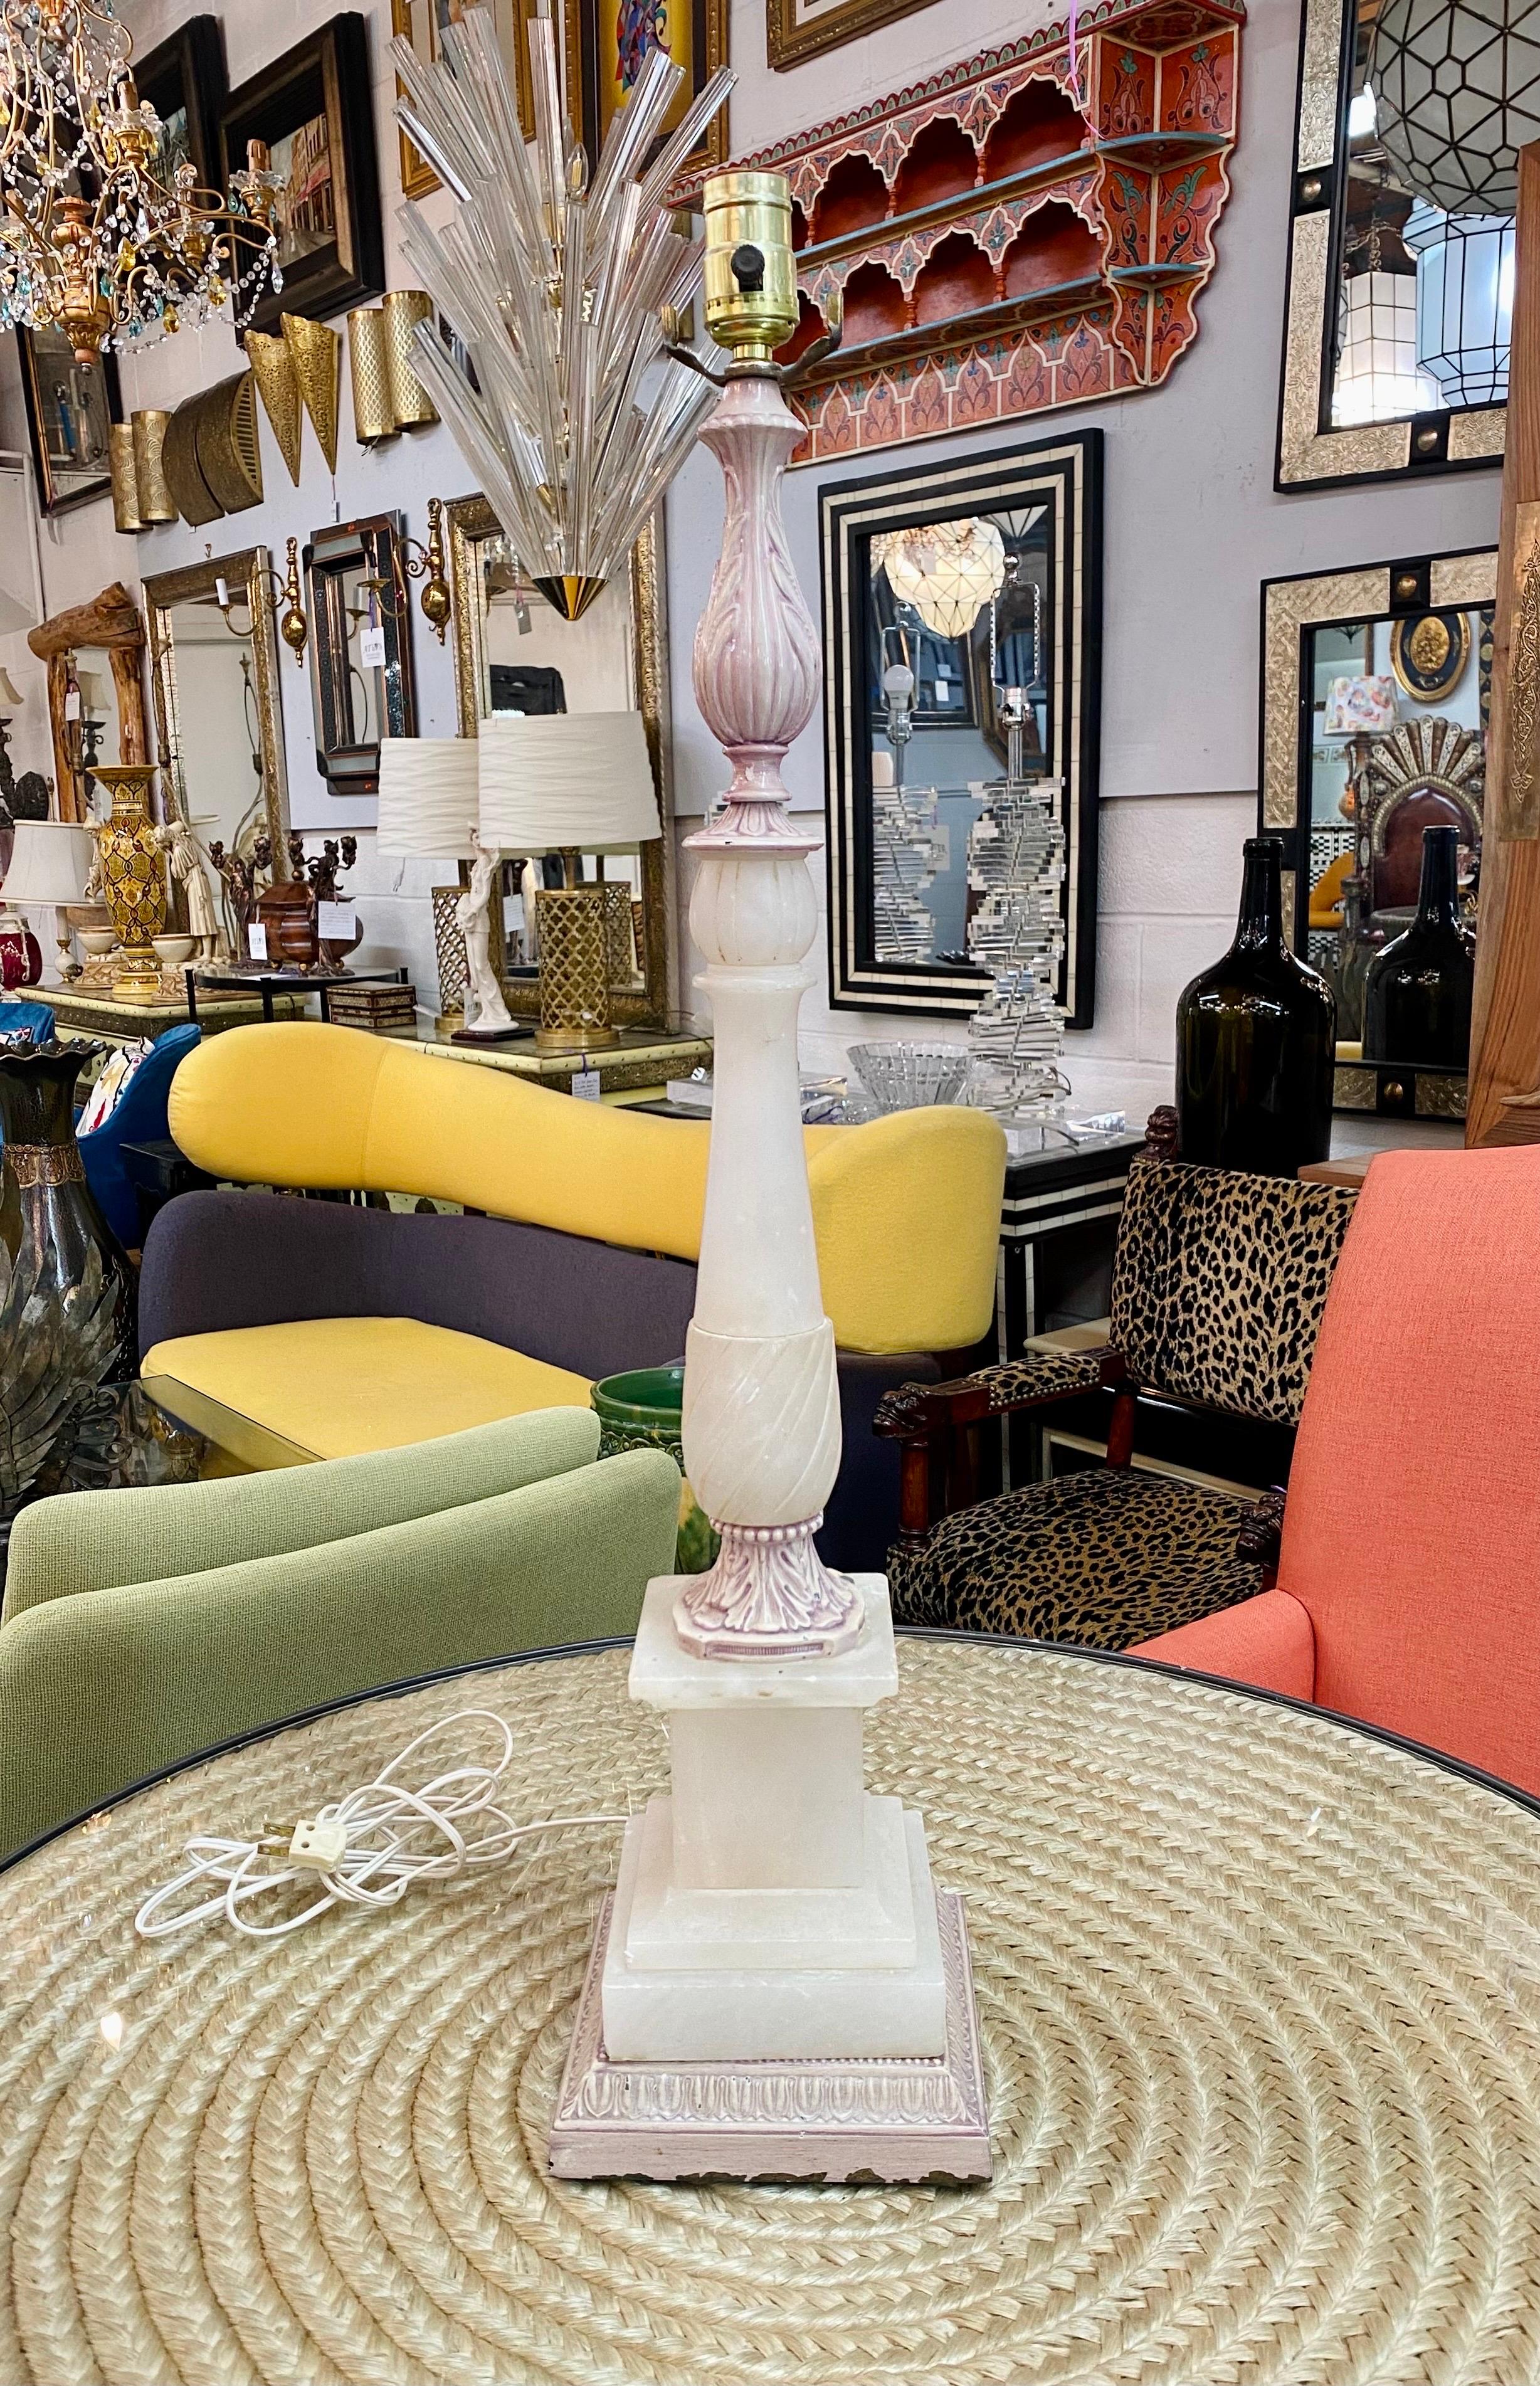 An elegant pair of Italian Neoclassical style table lamps made of hight quality alabaster. The Mid- century made table lamps have a beautiful carved columns showing curvy shapes adding to its charm and style . The 4 dimensional square base also